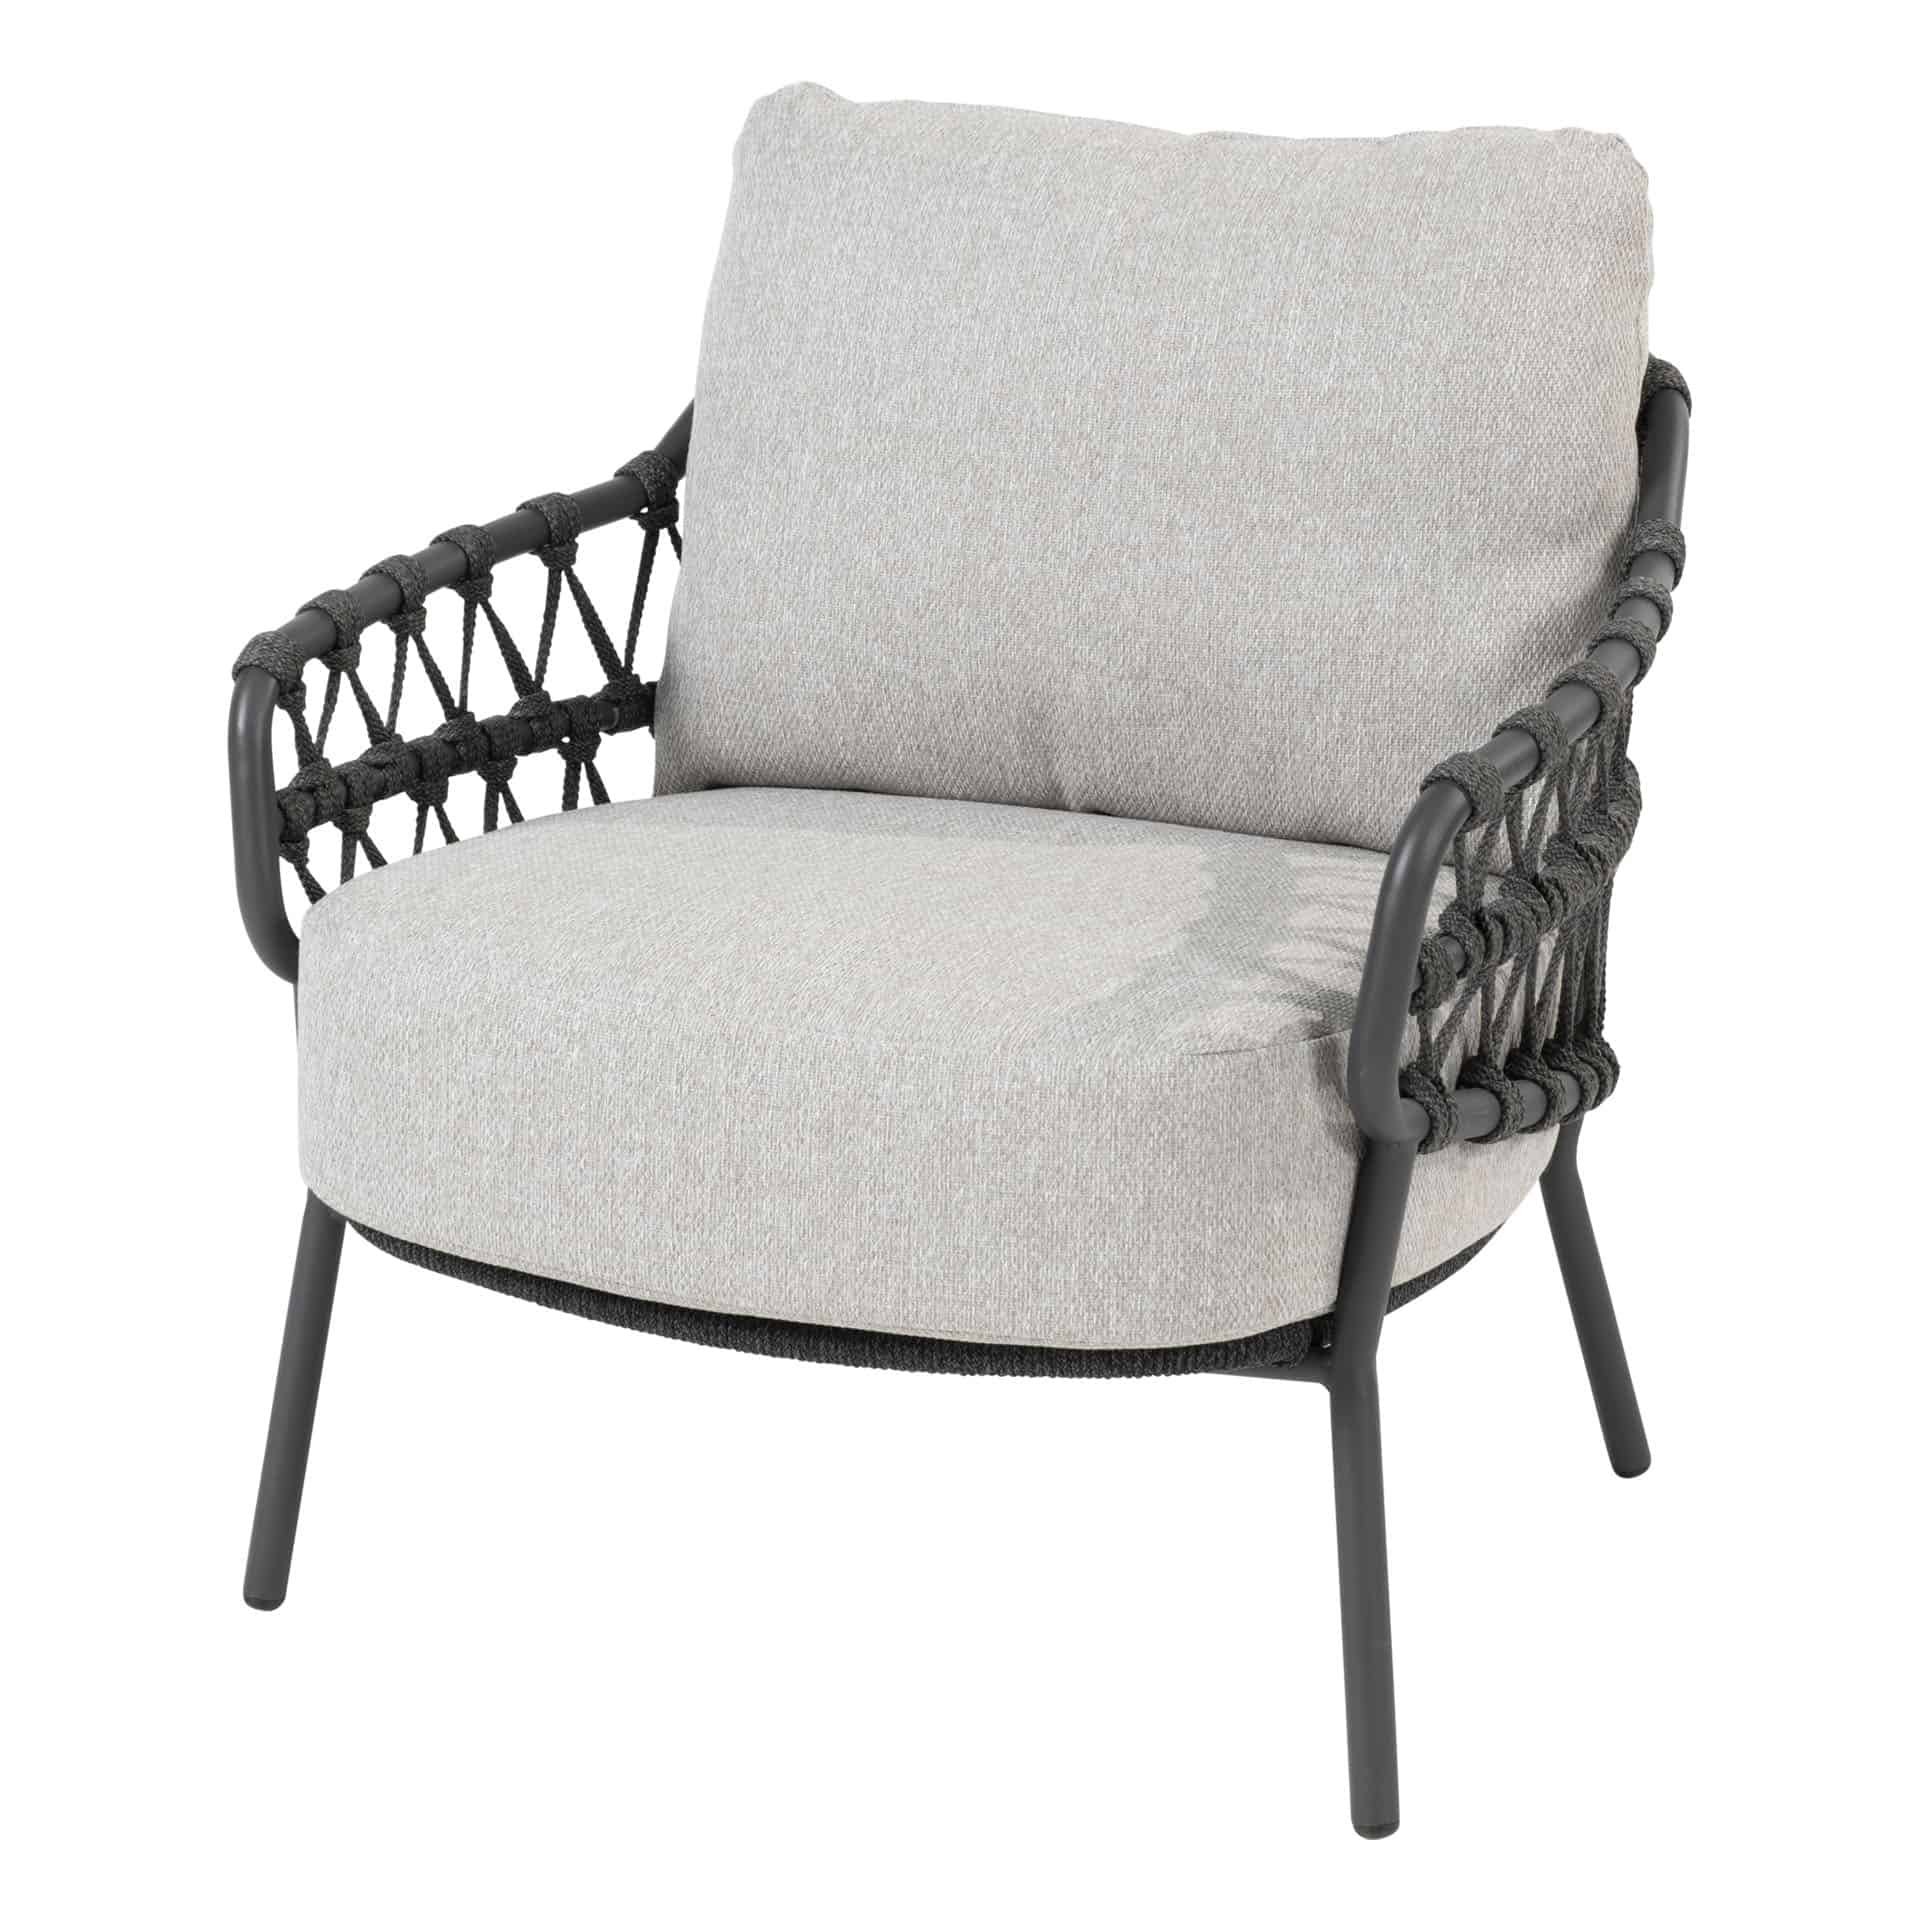 213894_-Calpi-low-dining-chair-anthracite-with-2-cushions-01